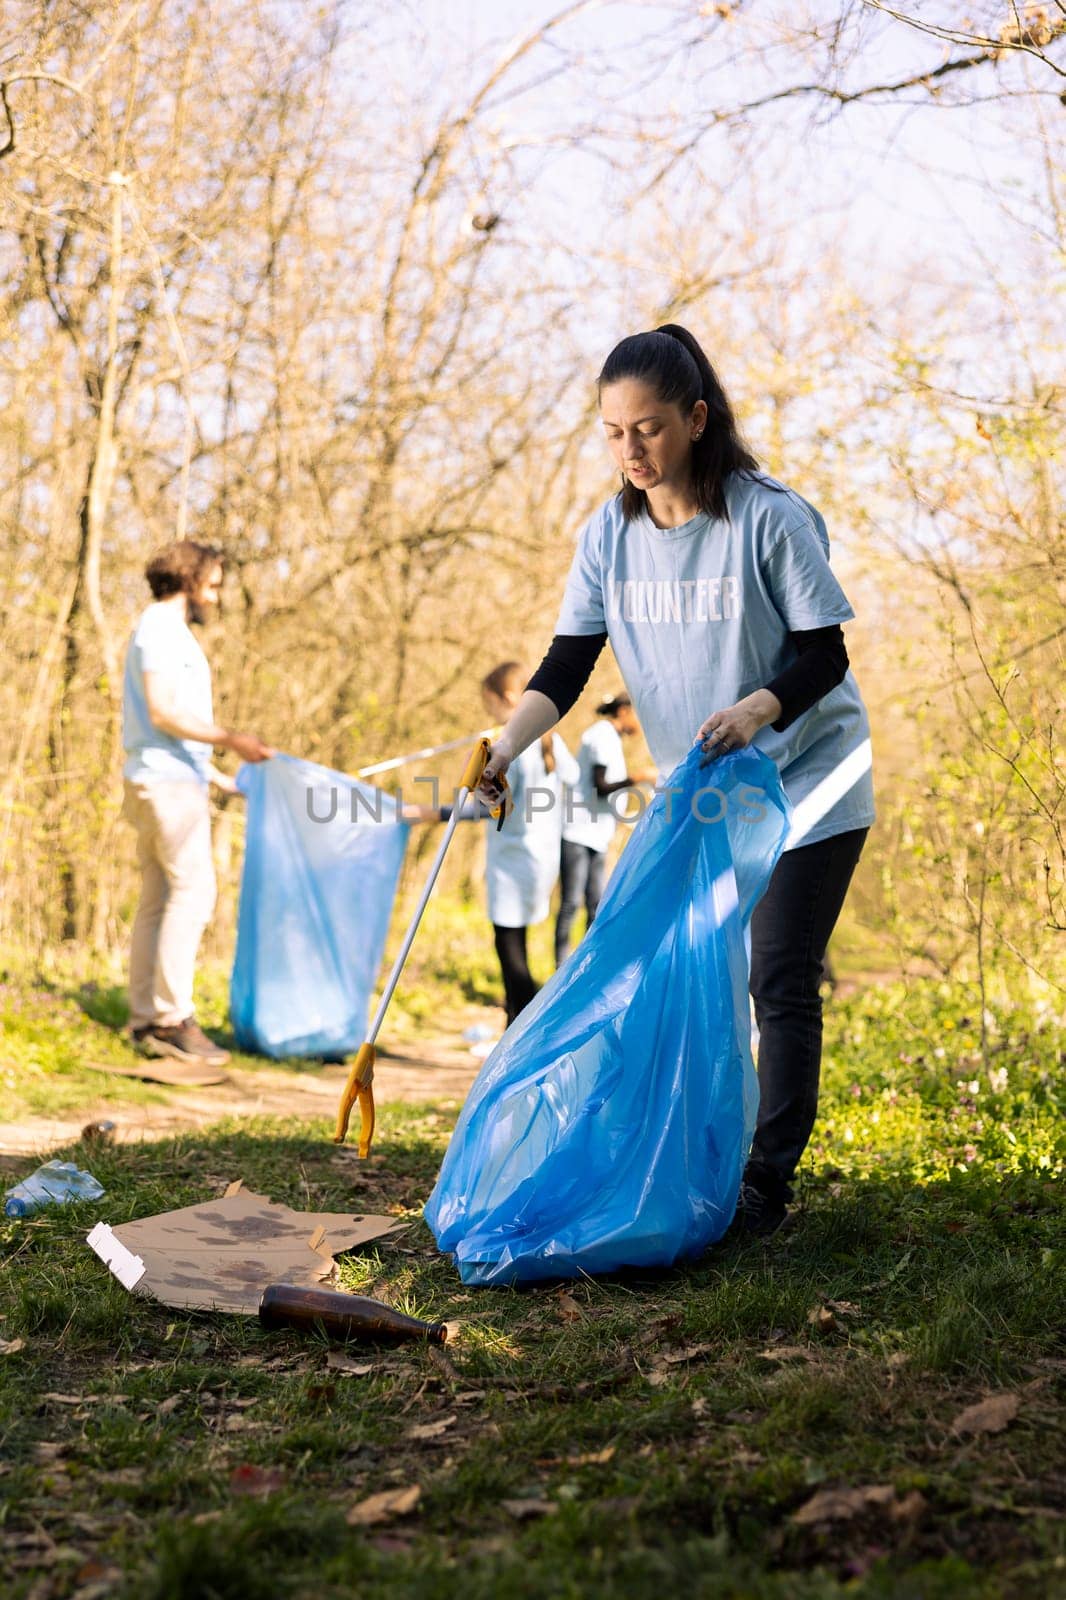 Woman environmentalist collecting junk from the ground to combat pollution within the forest ecosystem, environmental care. Activist doing community service to clean the woods from trash.